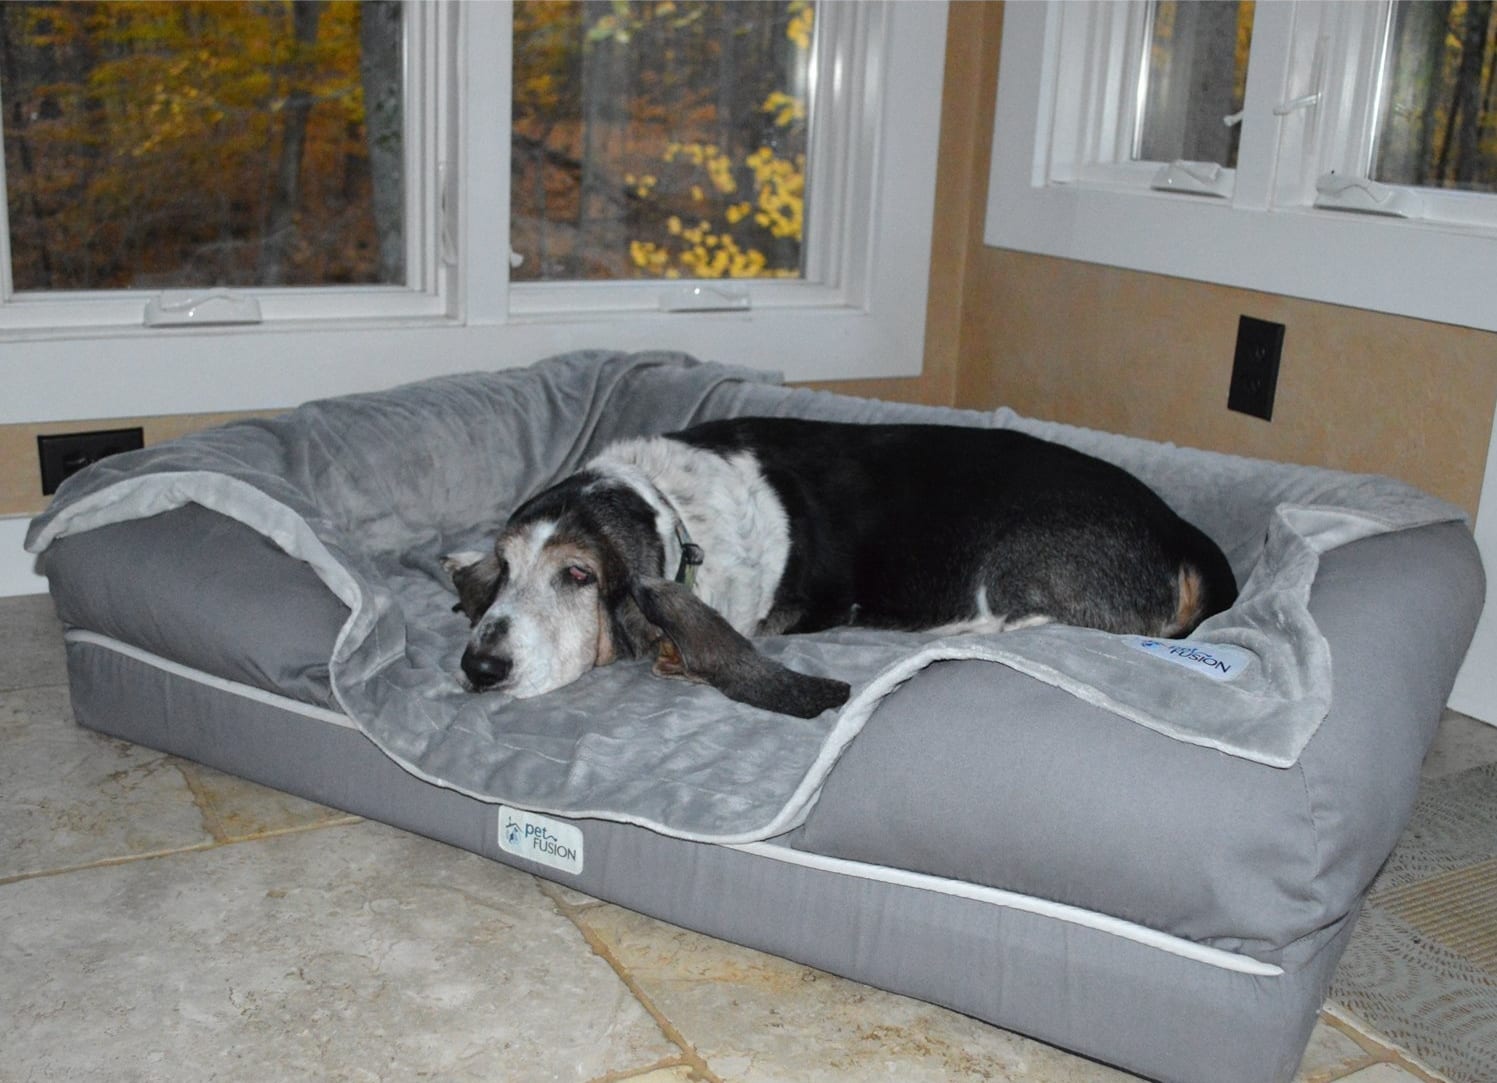 good dog beds for large dogs